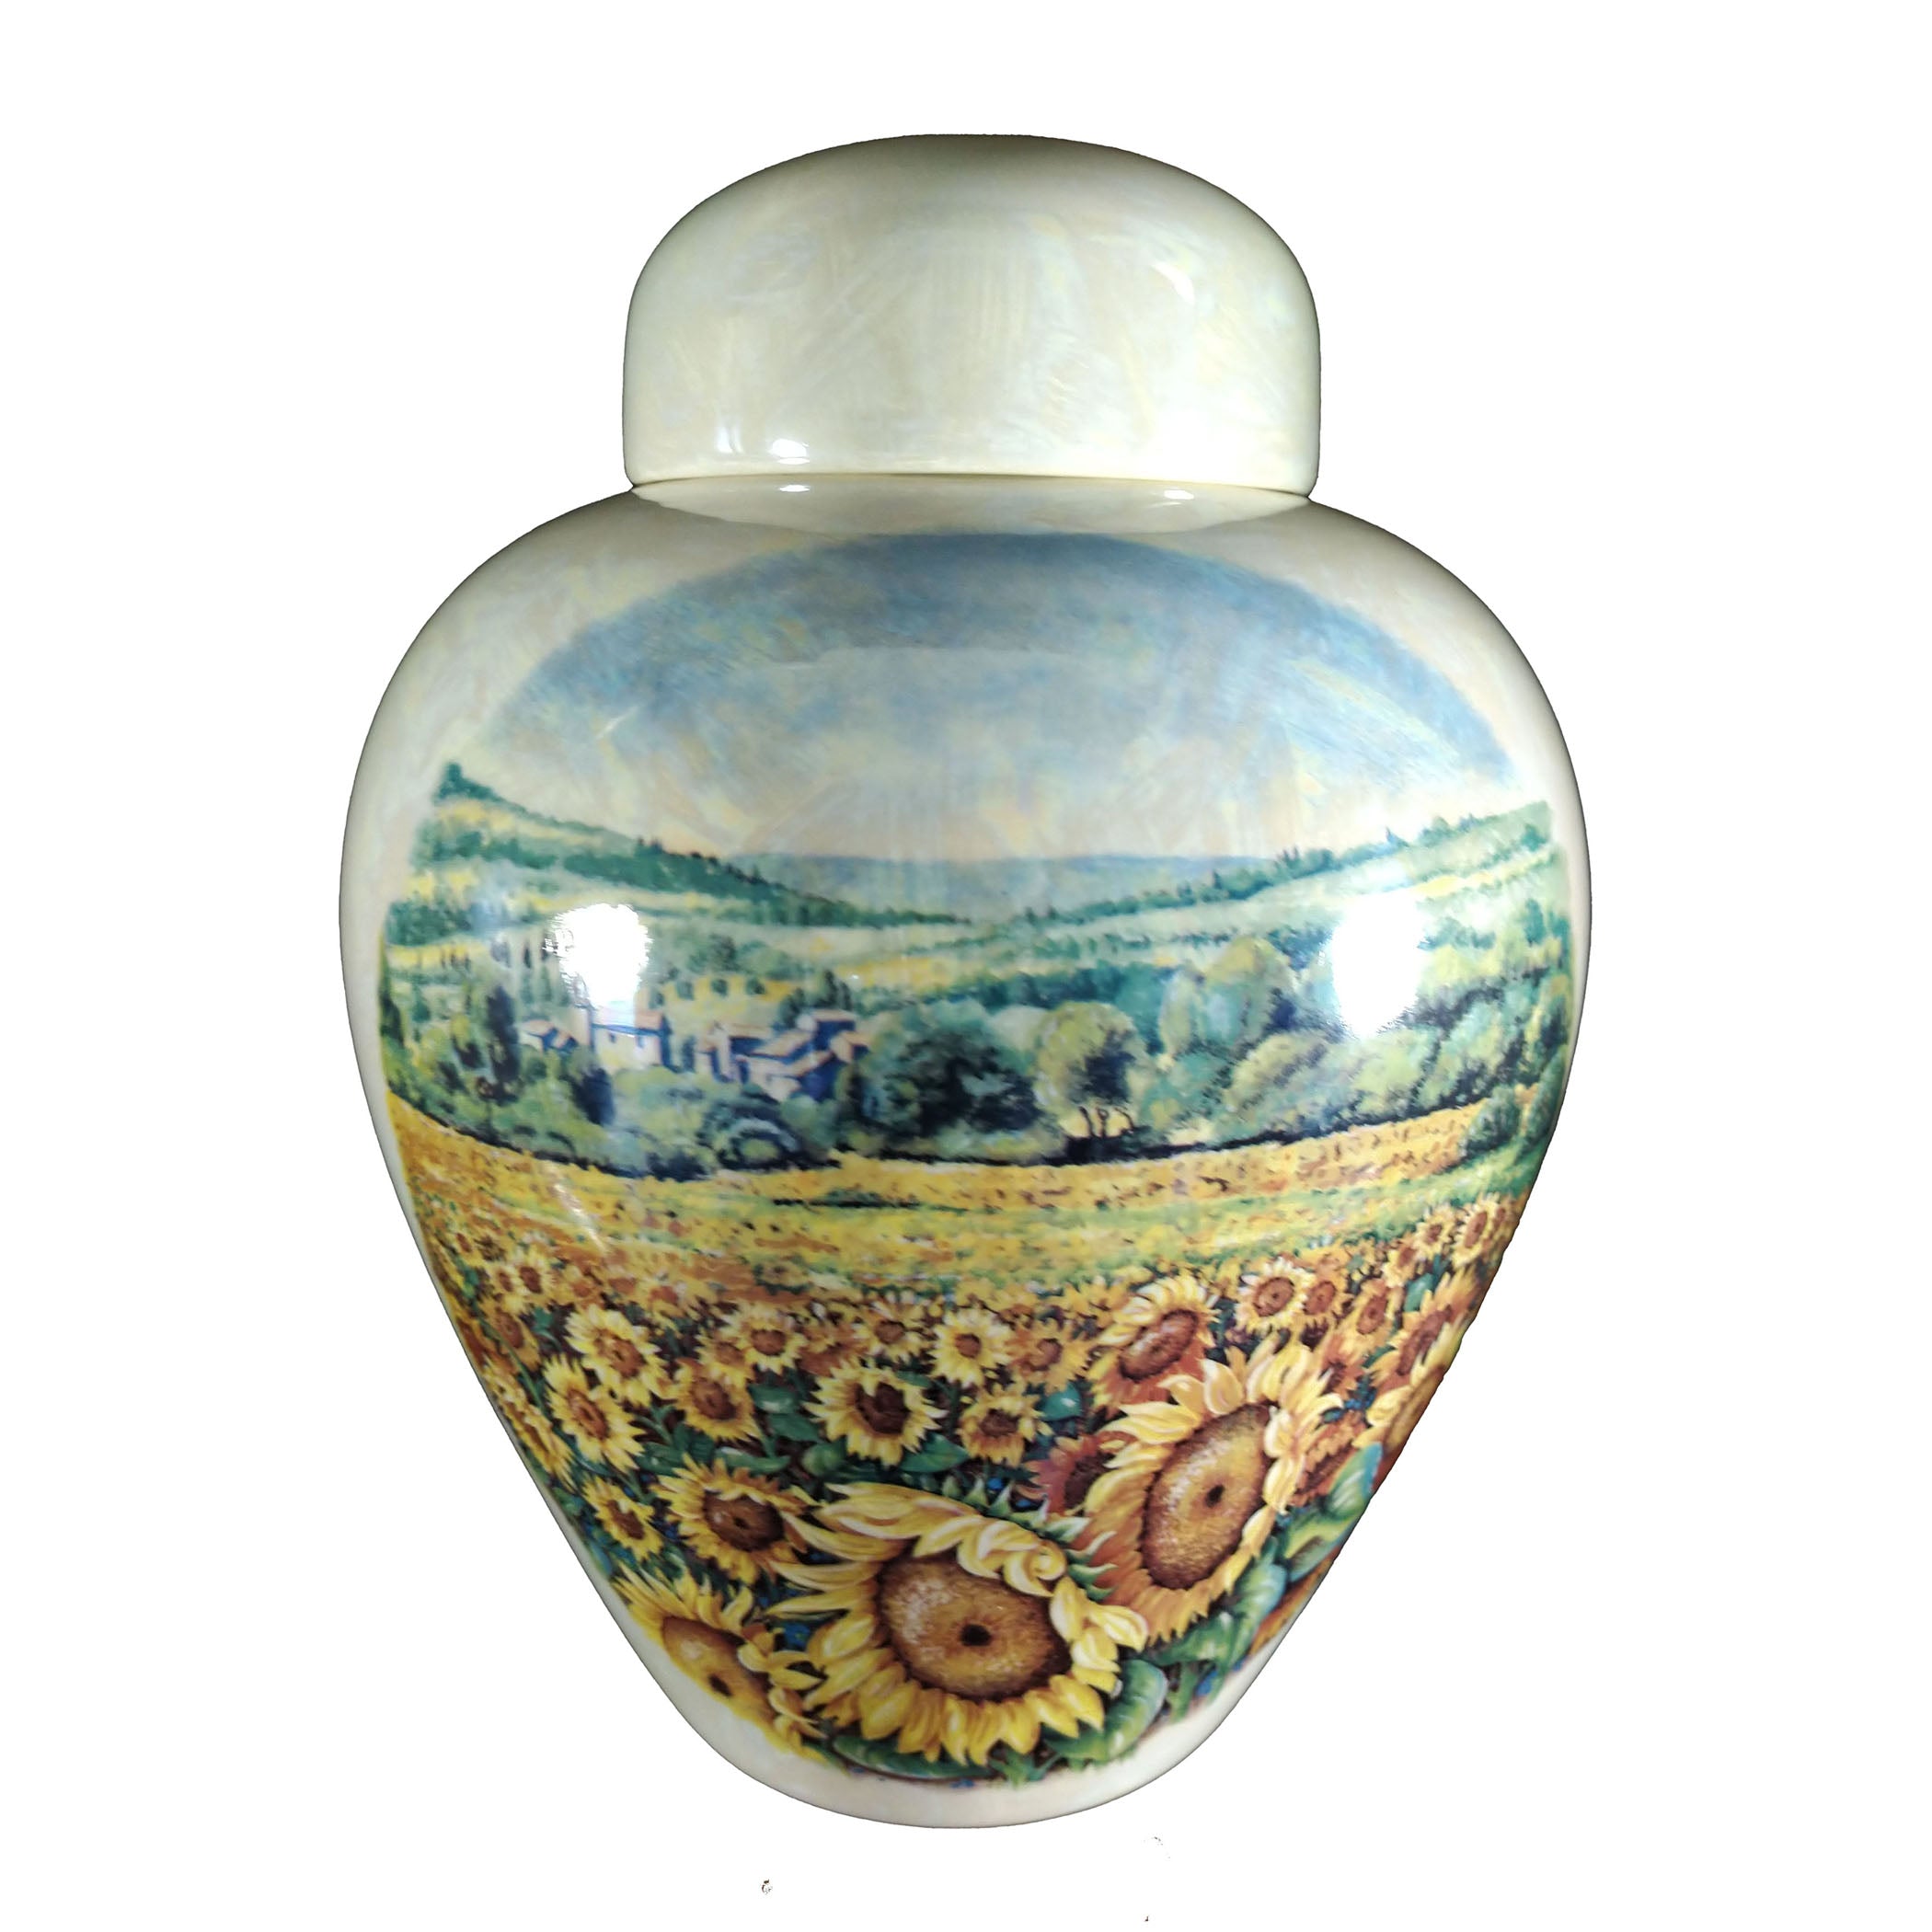 Collection of cremation urns, this urn having an image of sunflowers in a field. | Heartland Urns and Keepsakes